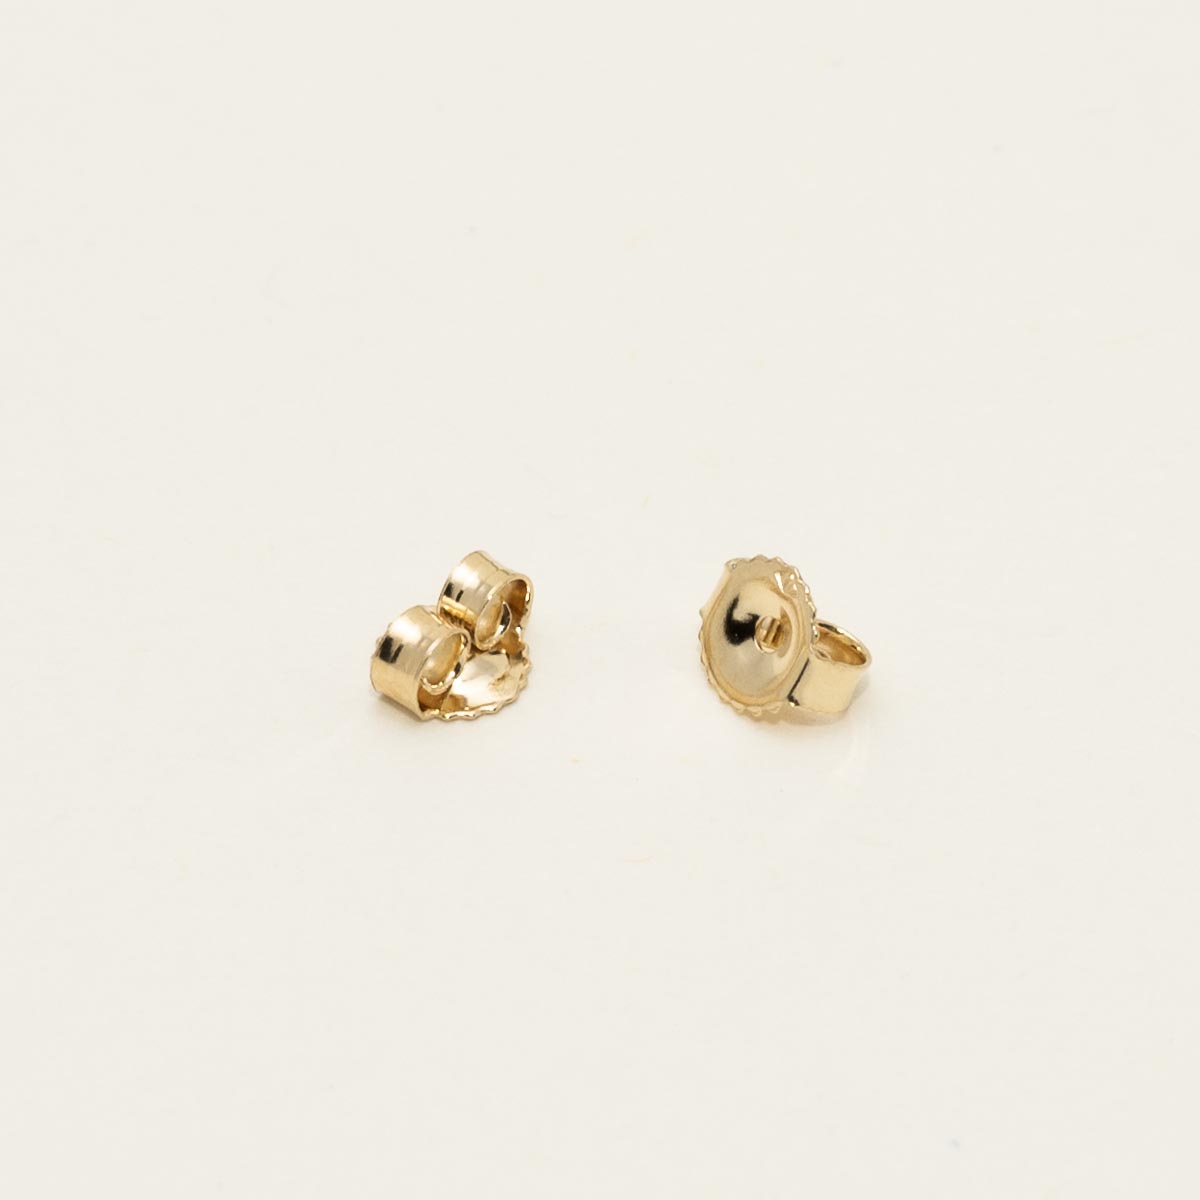 Mastoloni Cultured Freshwater Pearl Stud Earrings in 14kt Yellow Gold (6-6.5mm pearls)